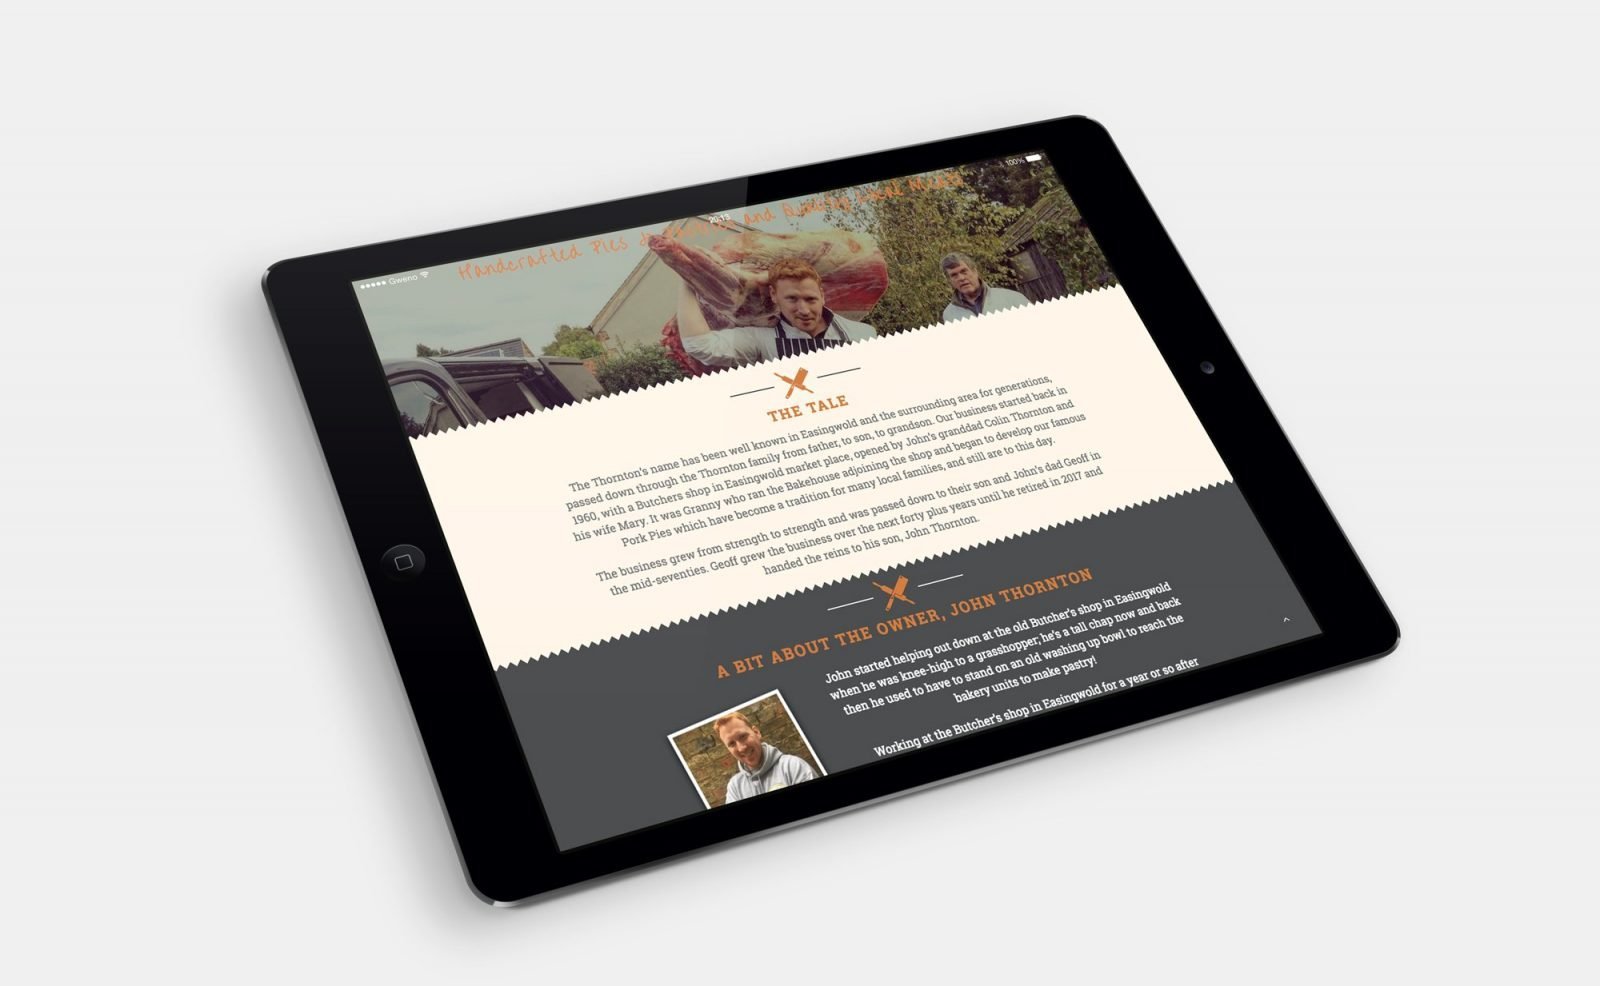 An ipad showing the home page for Thornton's Butchers and Bakehouse website design